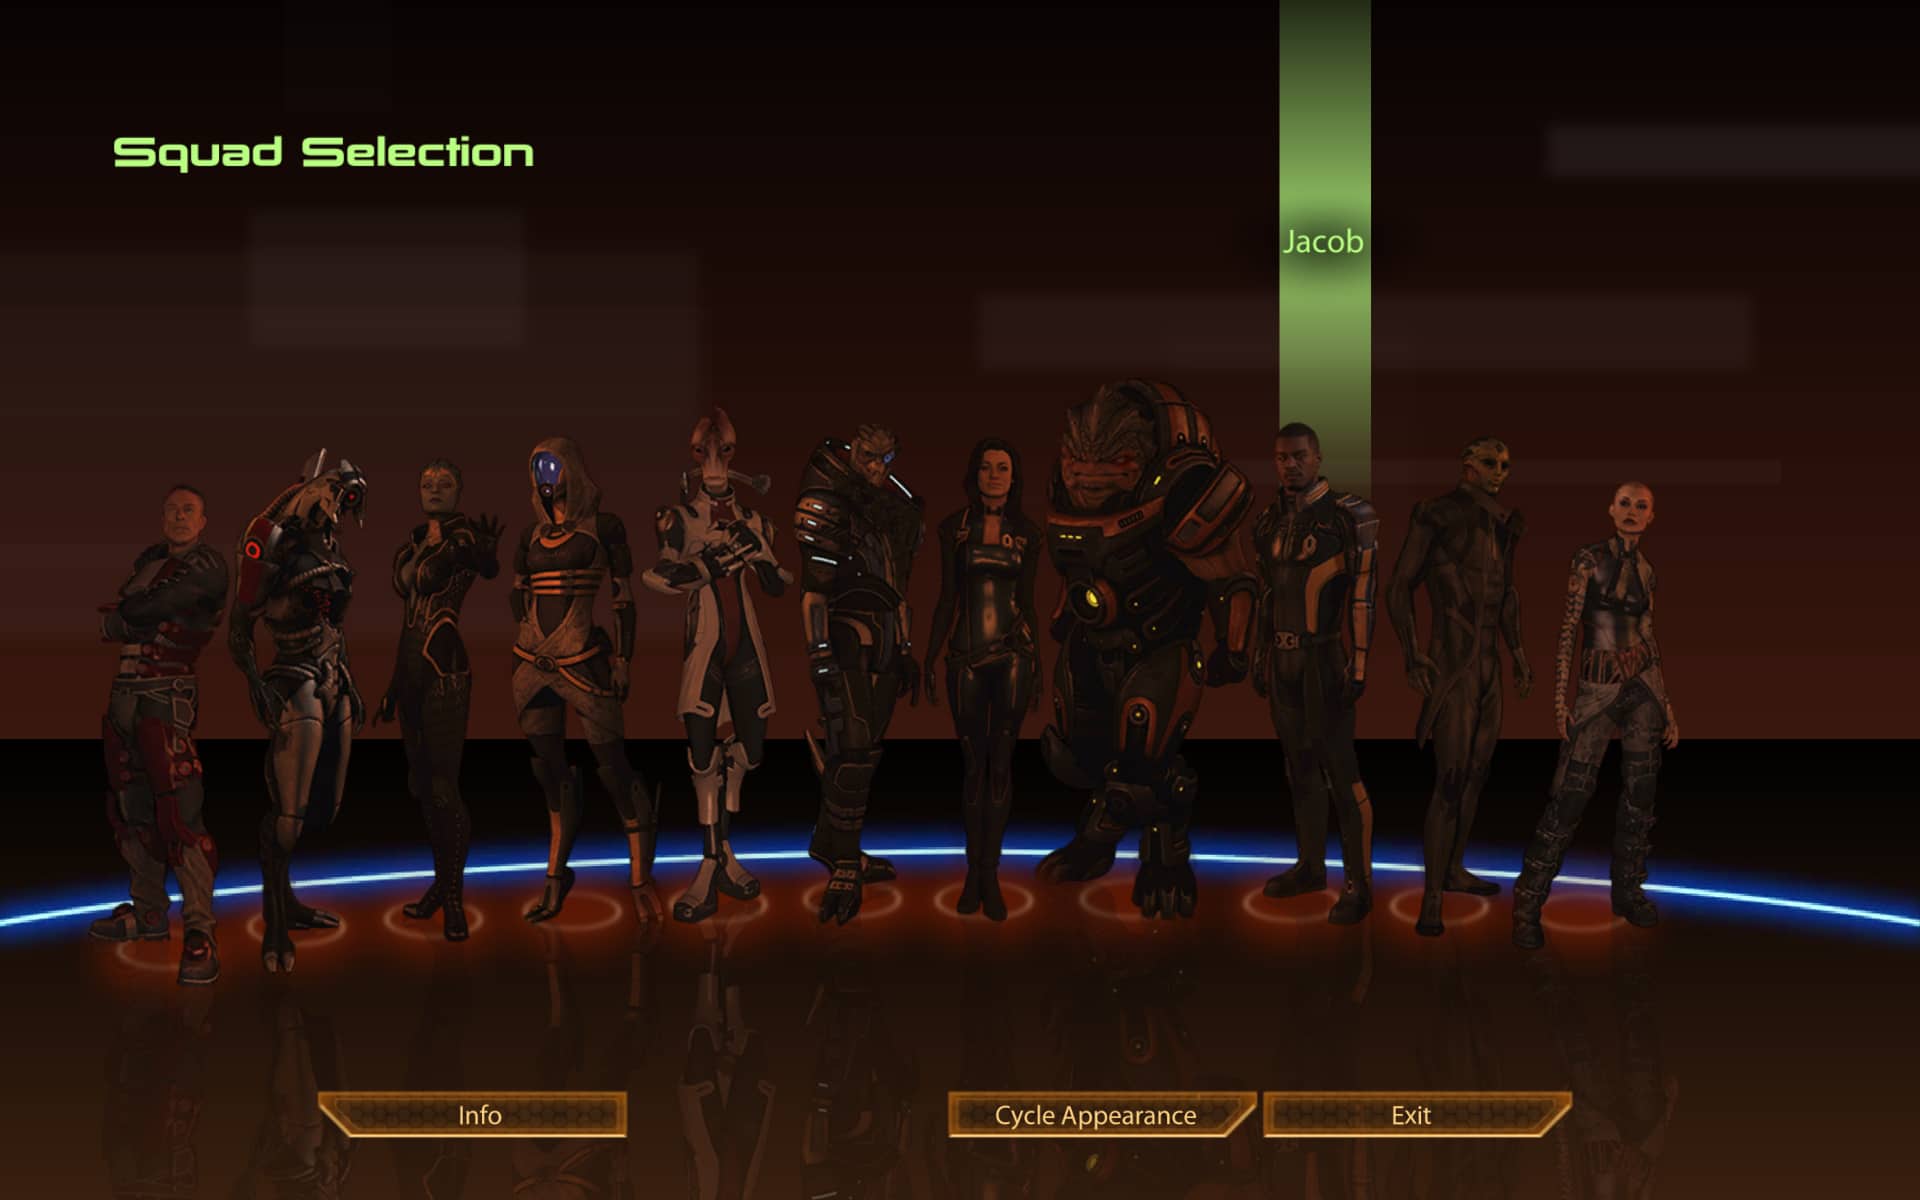 Mass Effect 2 suicide mission final mission do not cheat, let characters die rather than make them live character select